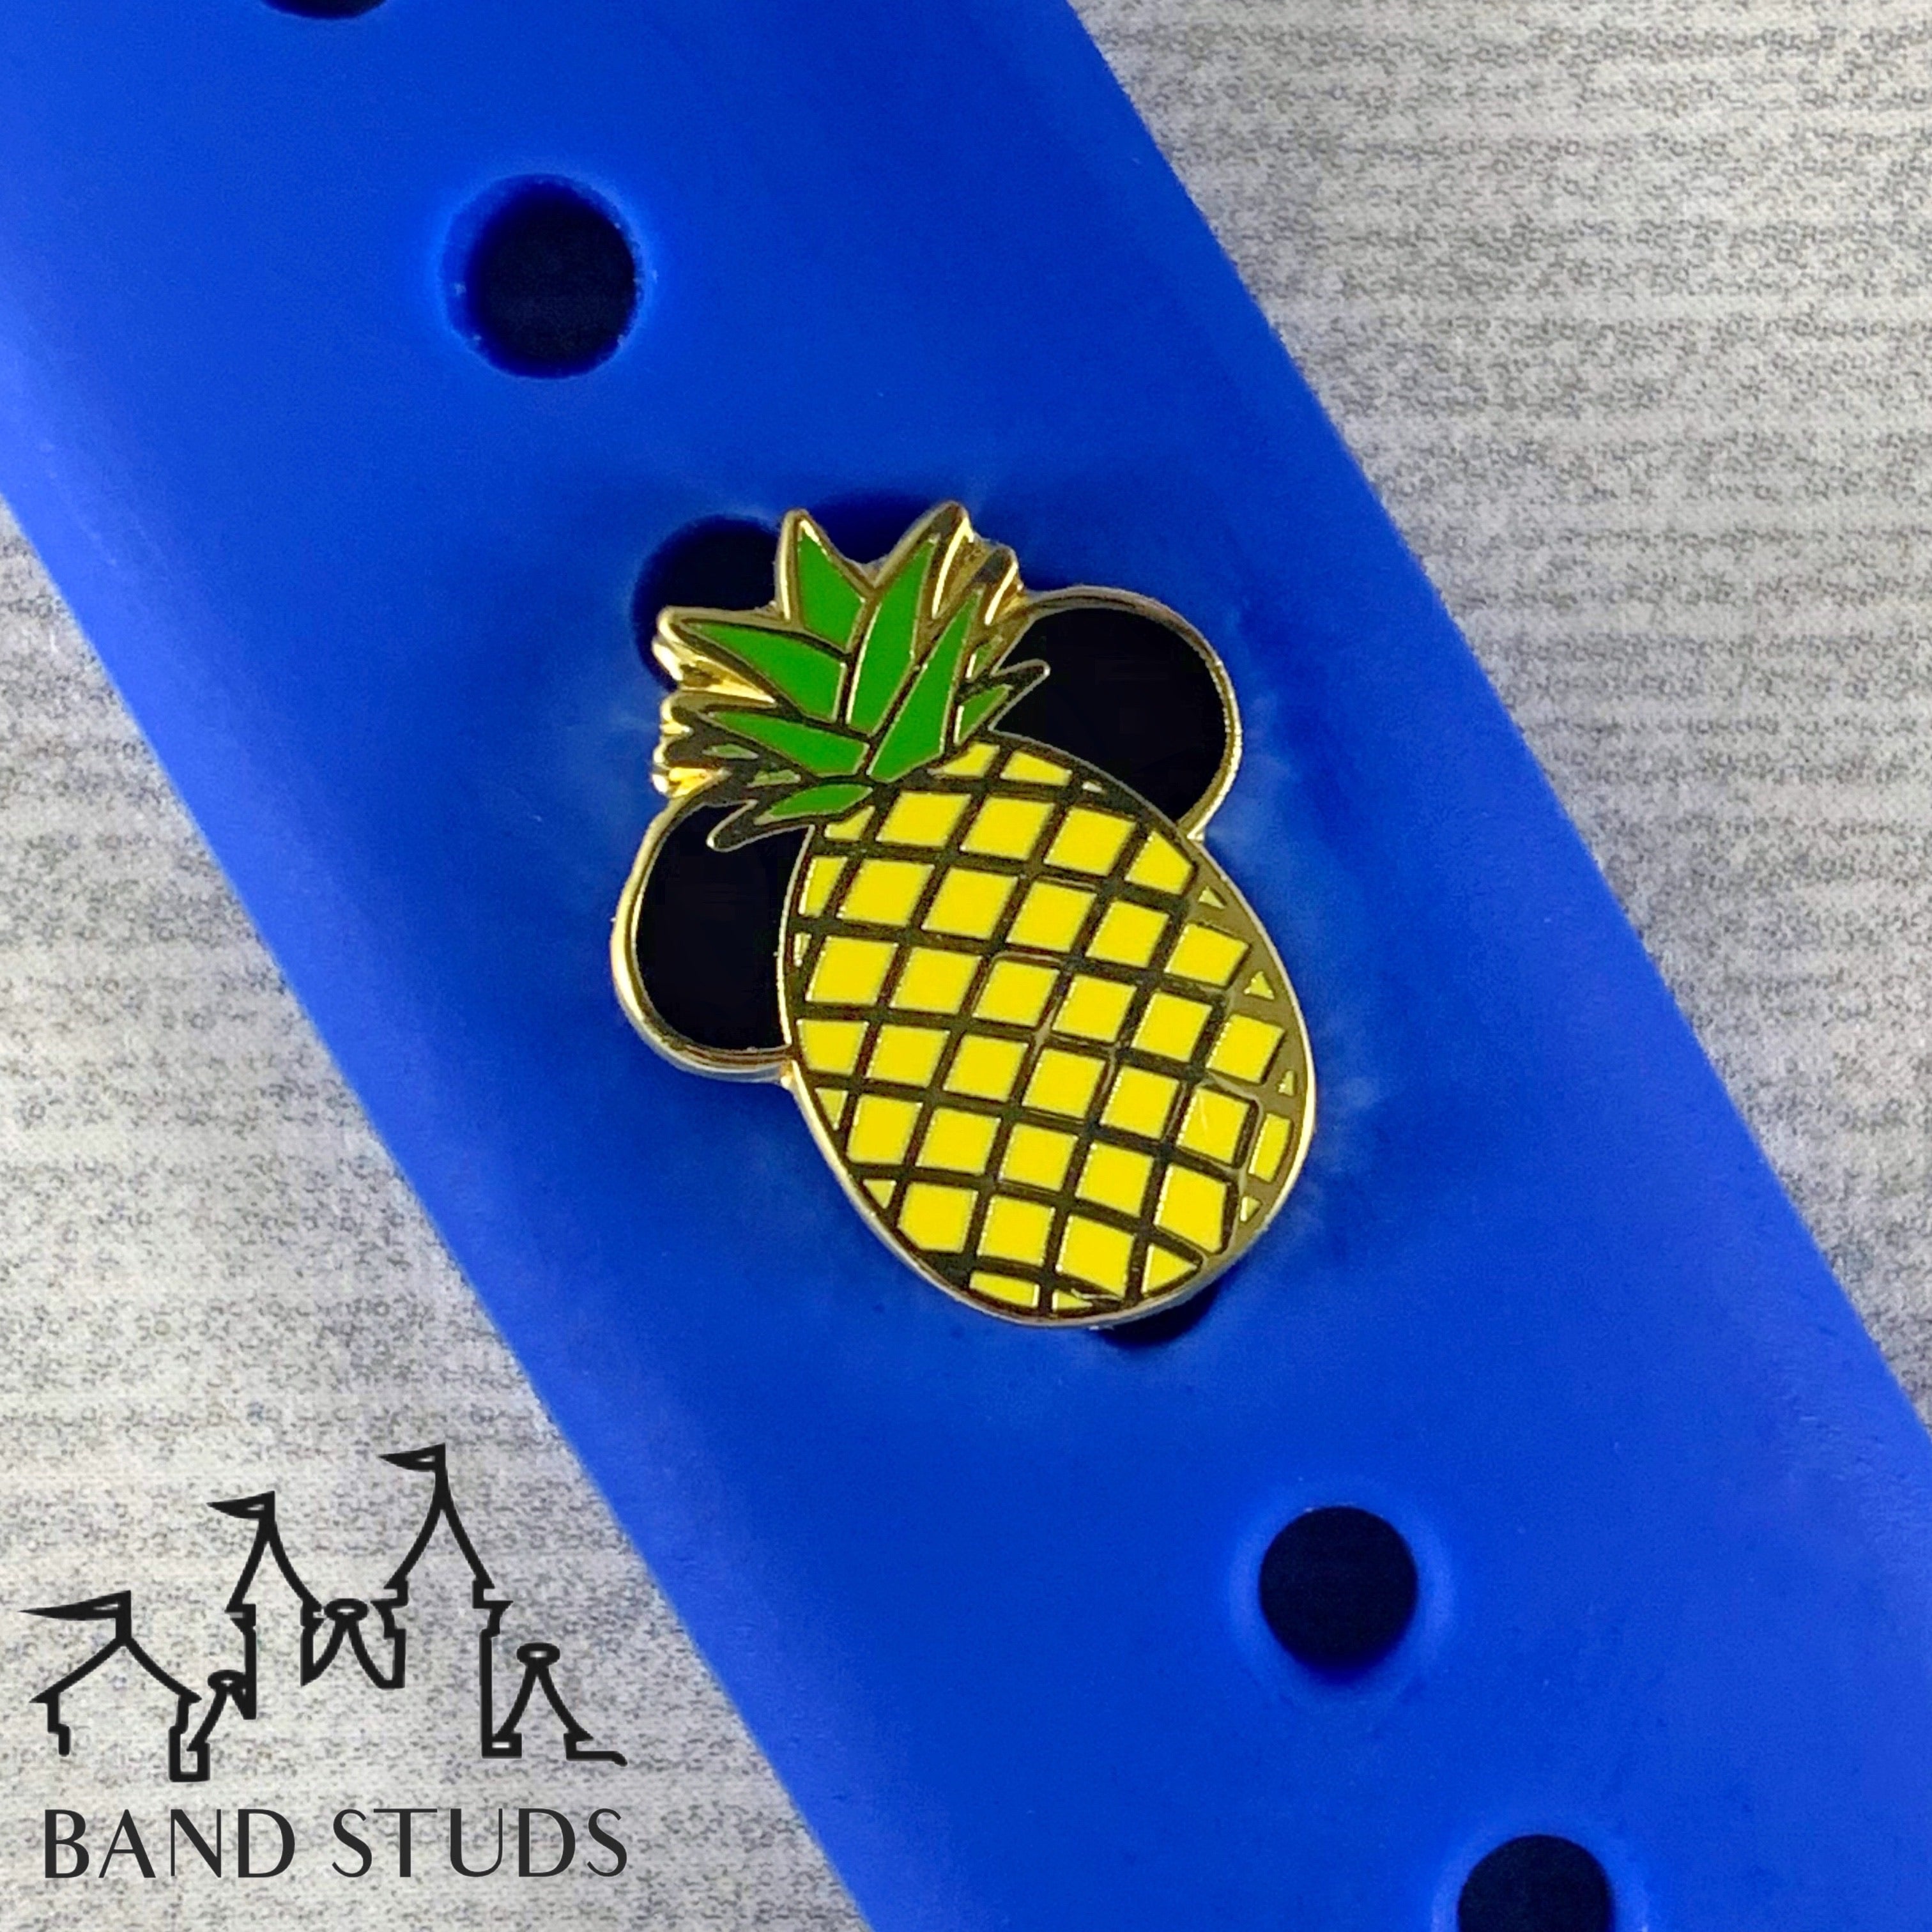 Band Stud® - Flower and Garden - Pineapple Mouse MARKDOWN